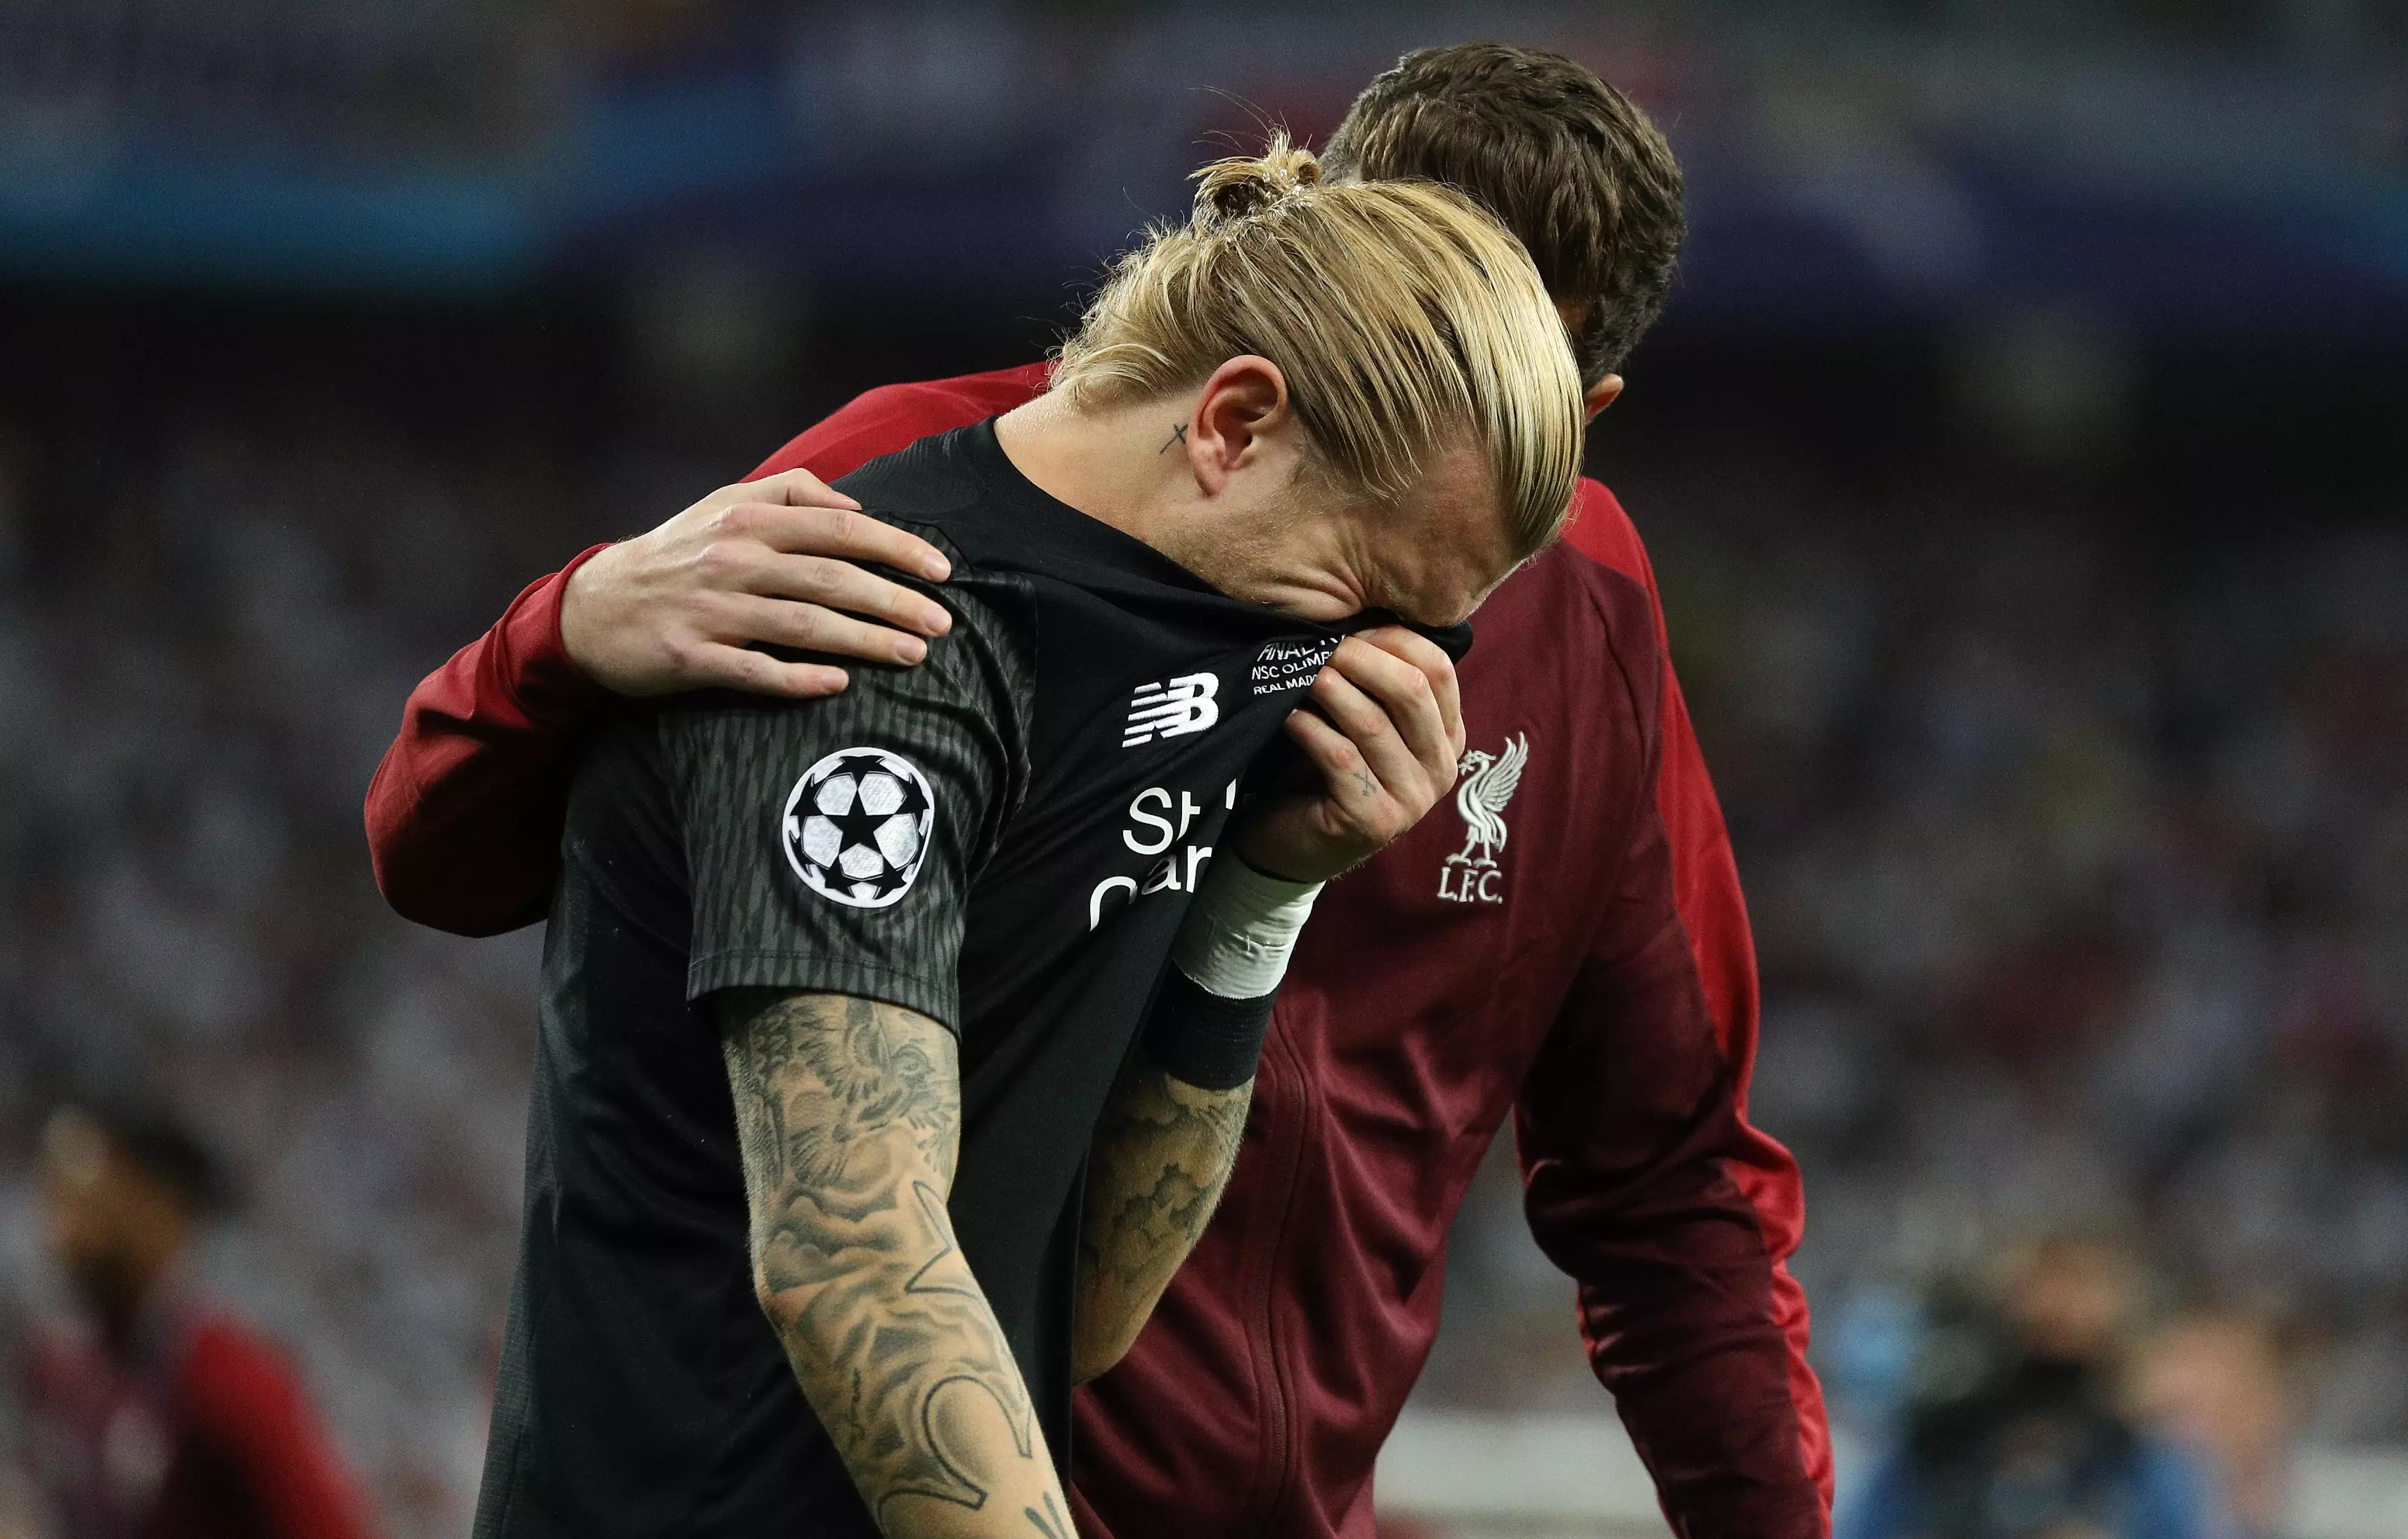 Karius needed to be consoled at full time in the Champions League final. Image: PA Images